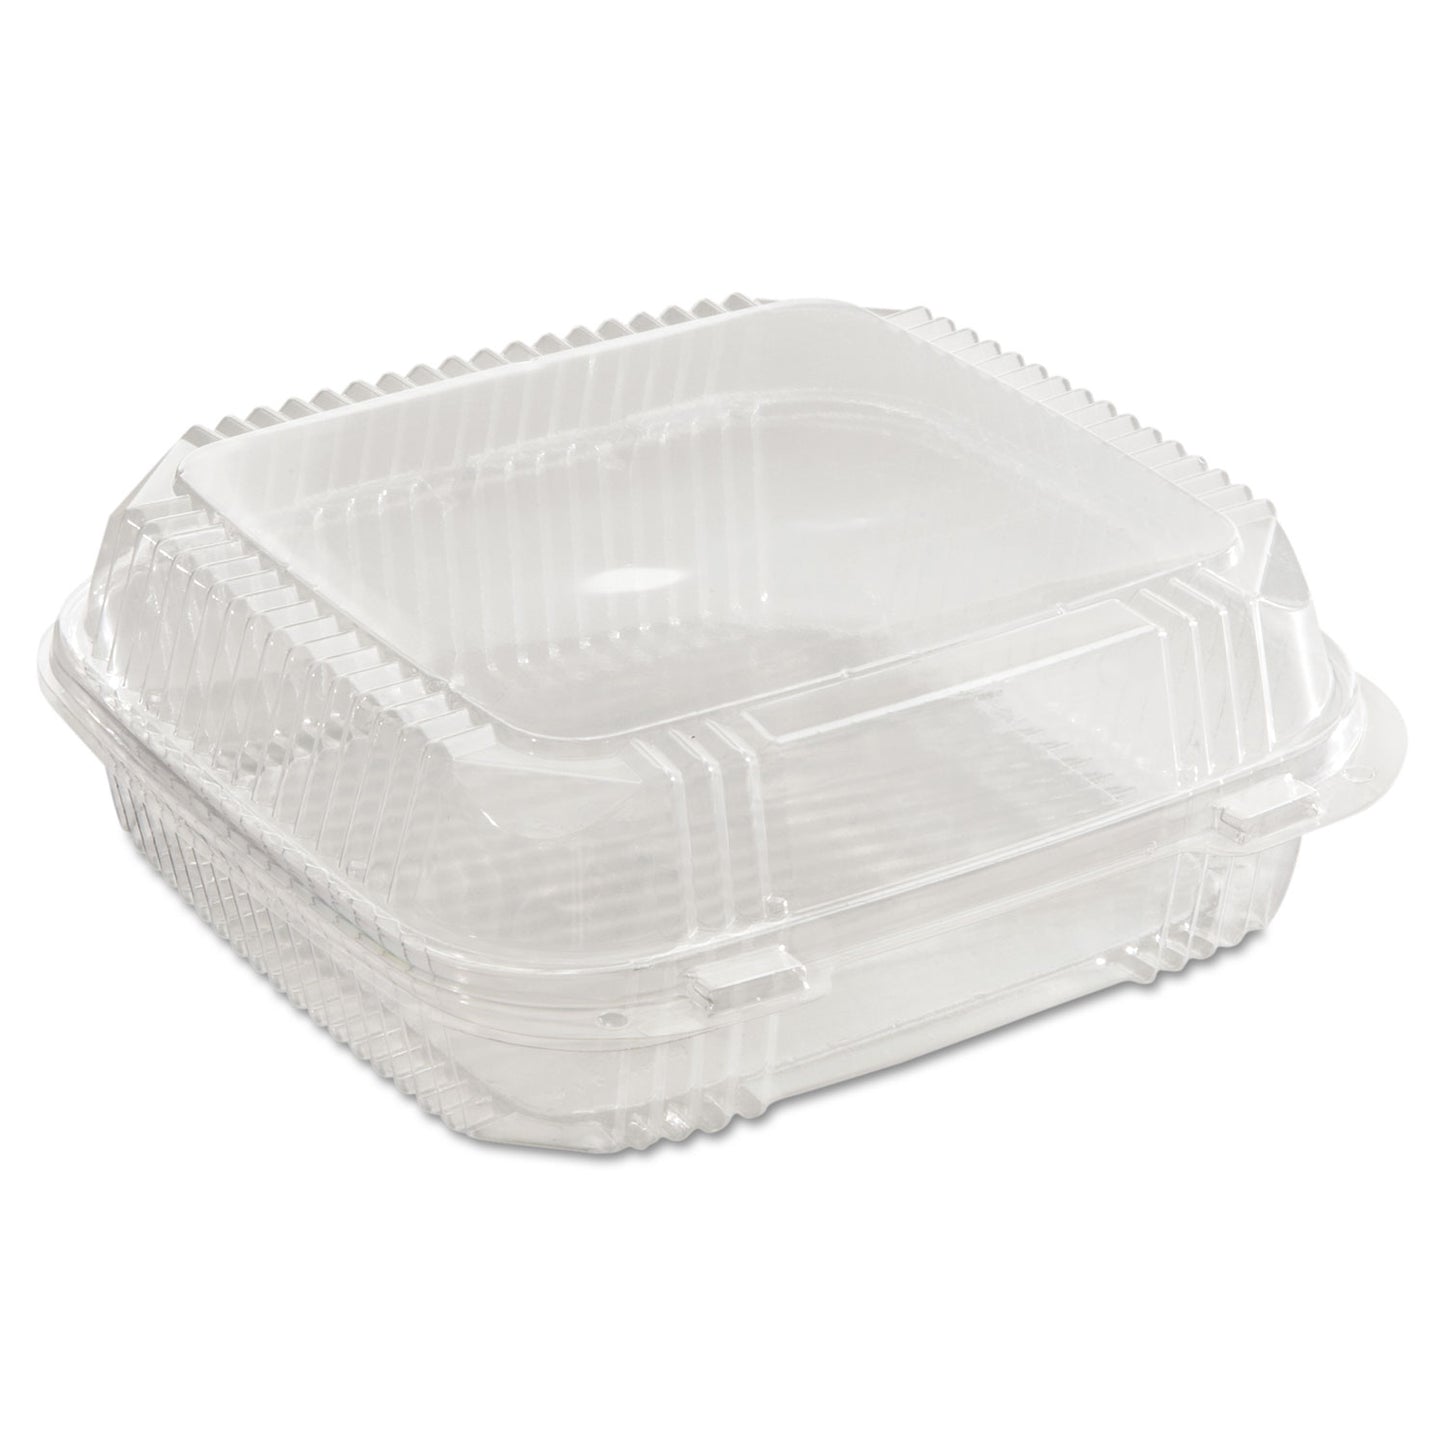 YC18-1120 8" CLEAR CLAMSHELL CONTAINER PACTIV (200)